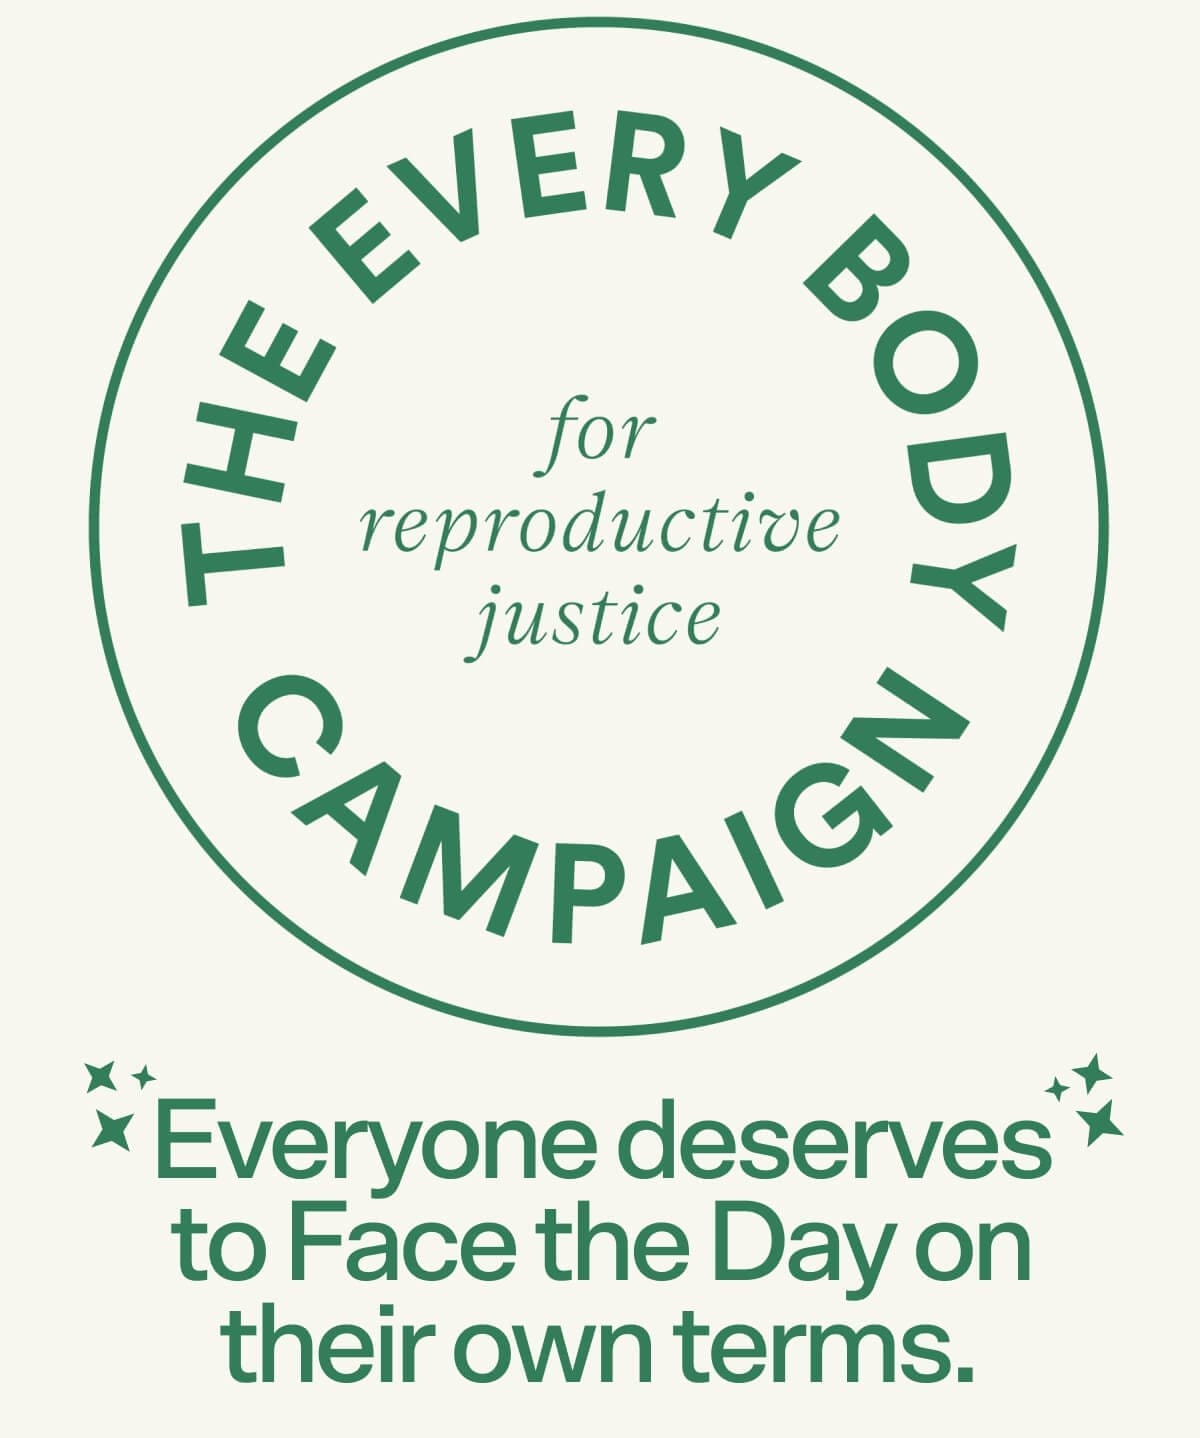 The Every Body Campaign for reproductive justice. Everyone deserves to Face the Day on their own terms.